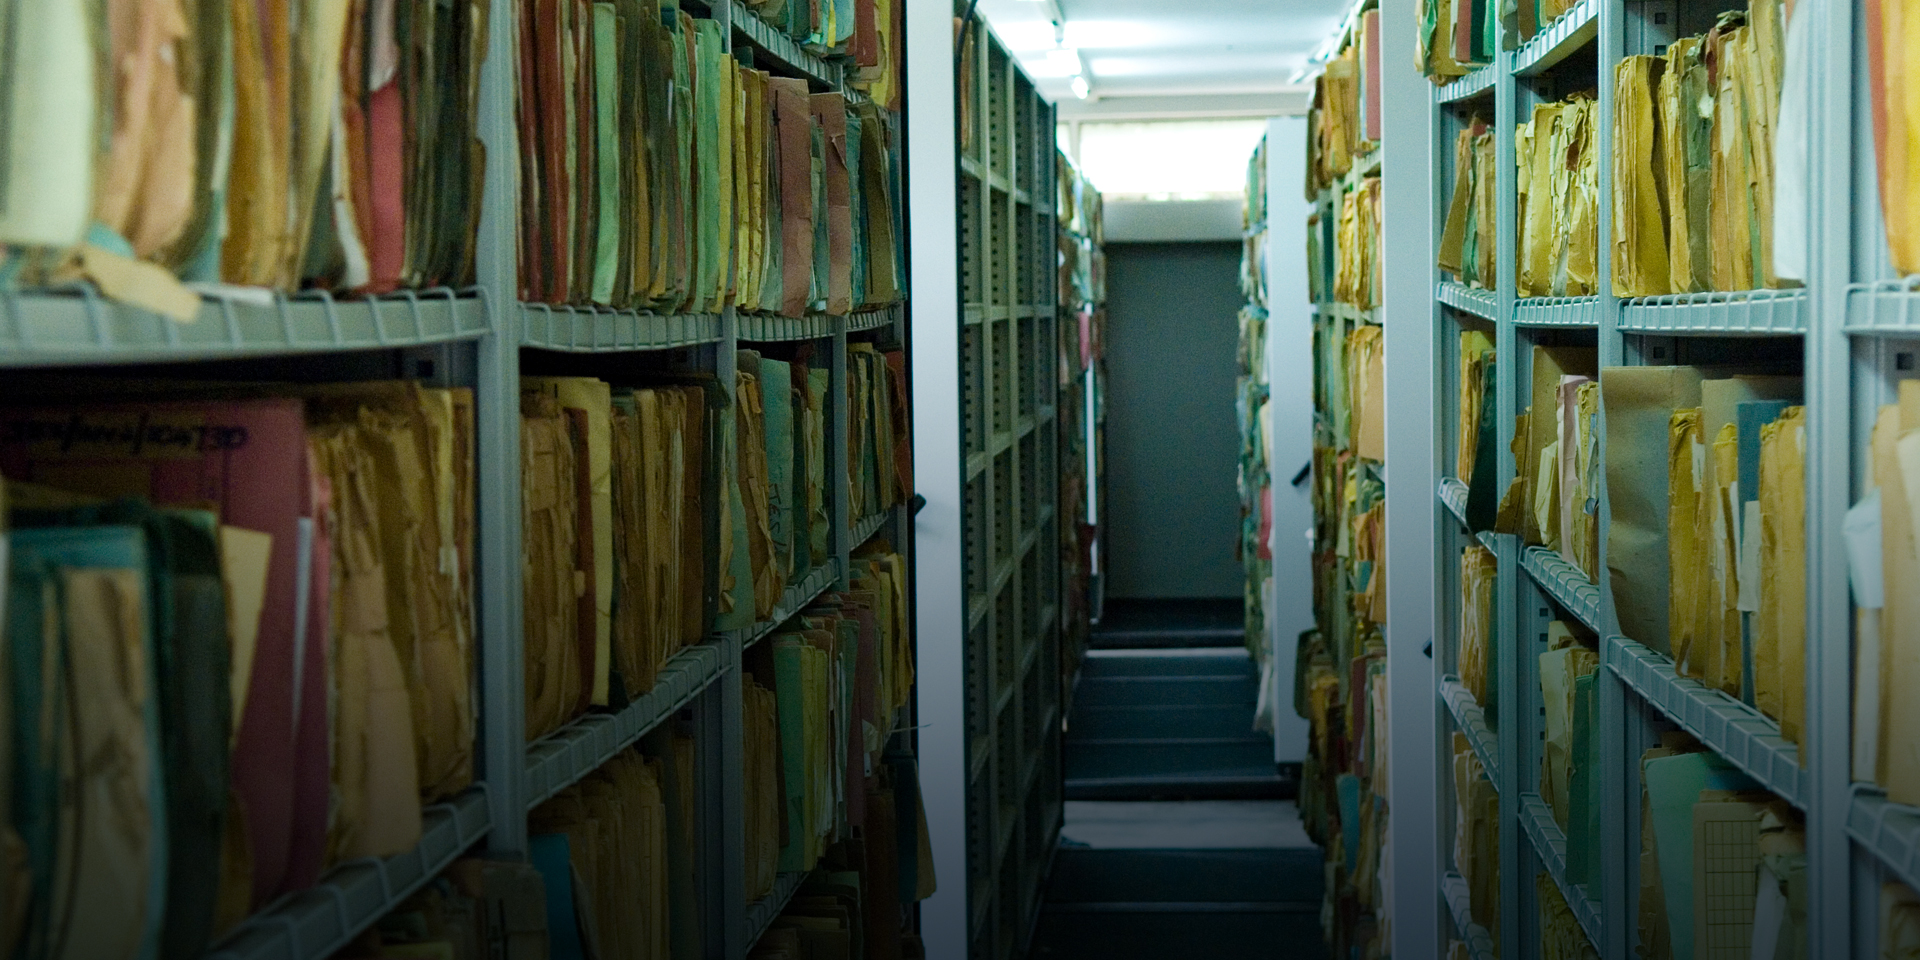 An aisle in a file room with several manilla envelopes filling shelves on each side.